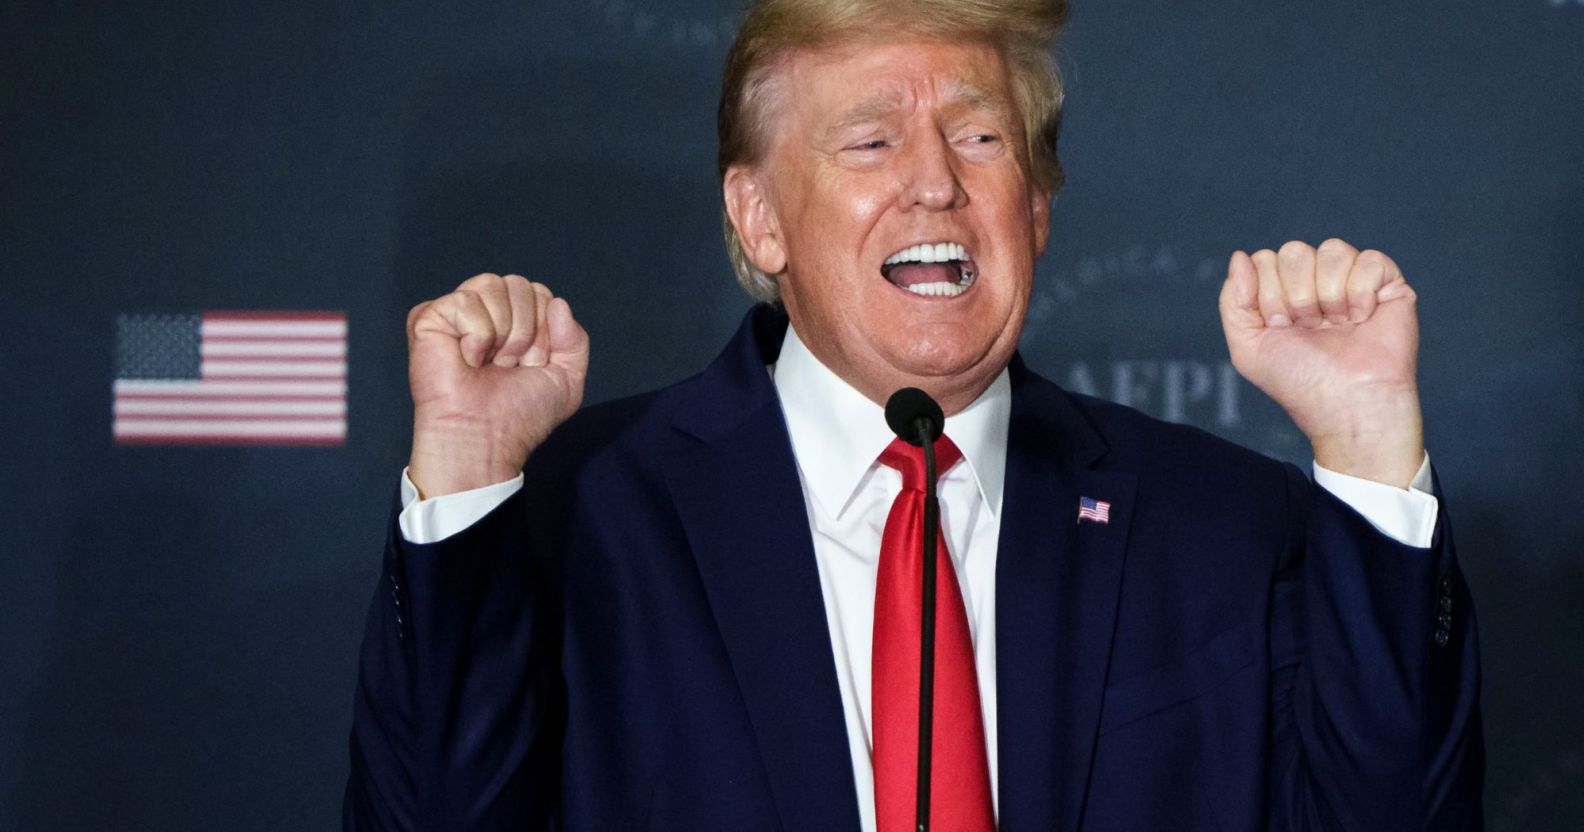 Republican president Donald Trump wears a suit and tie as he holds both his hands up near his head in the shape of fists